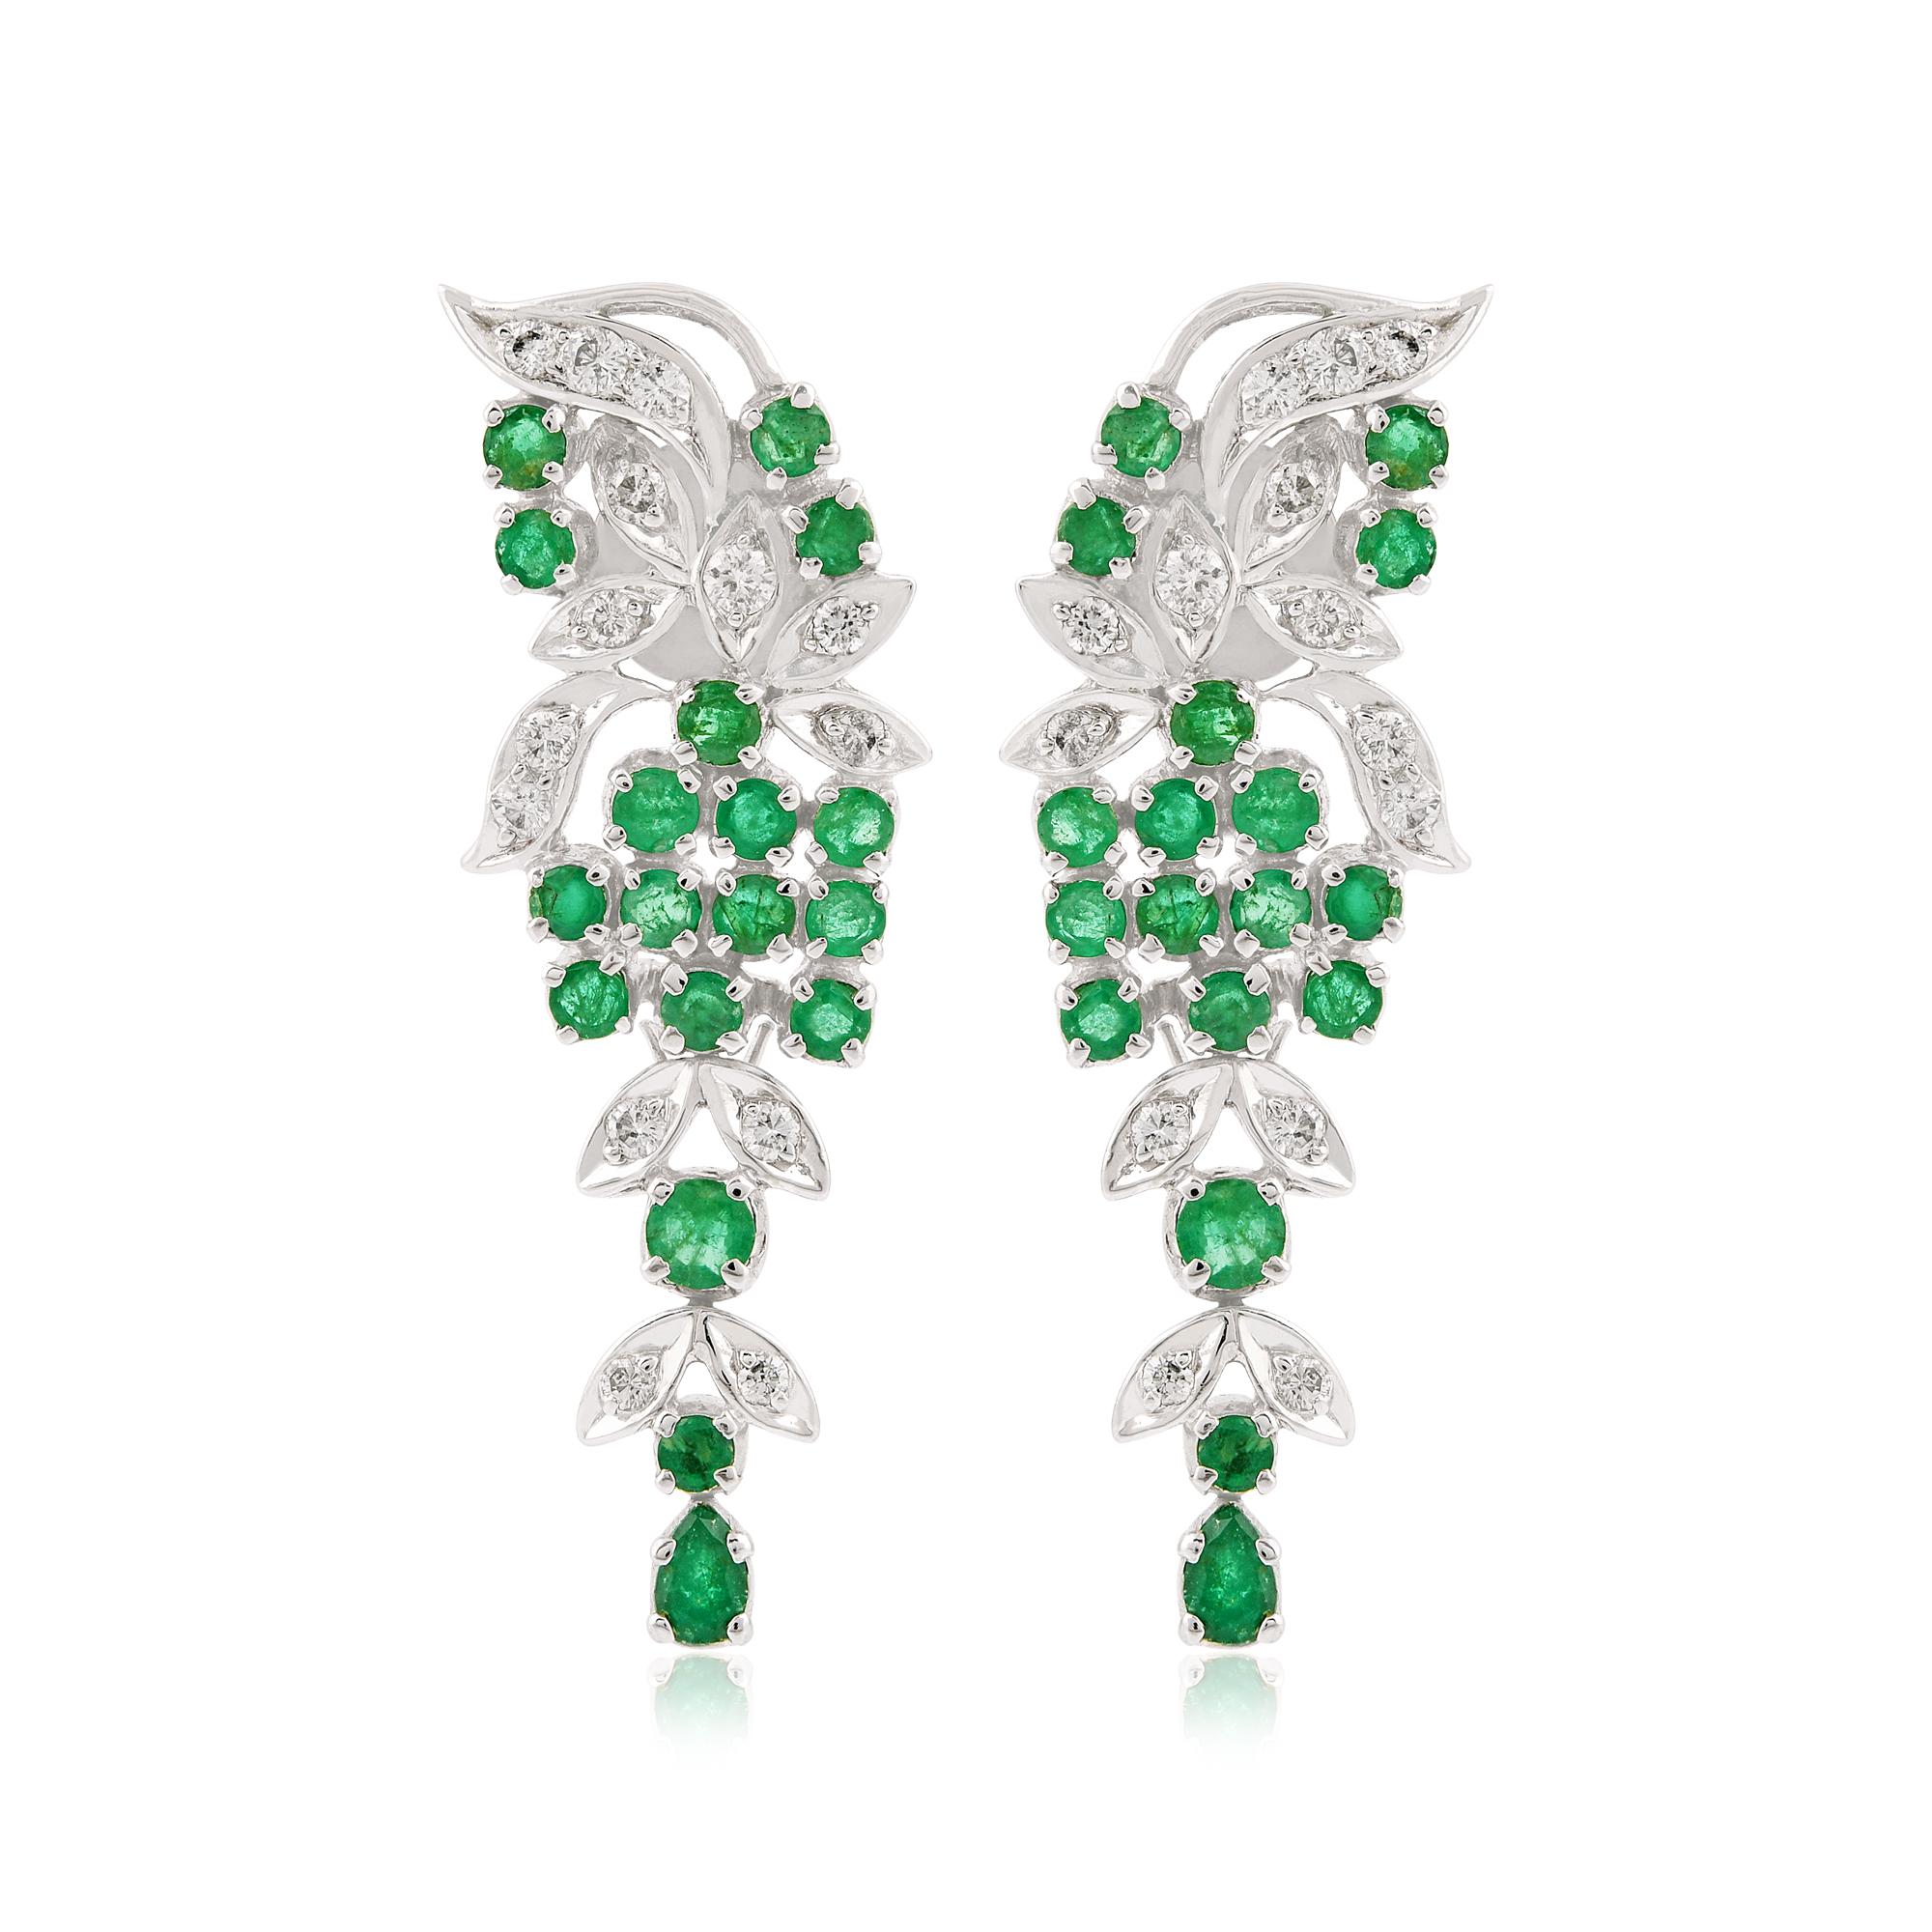 emerald earrings and necklace set